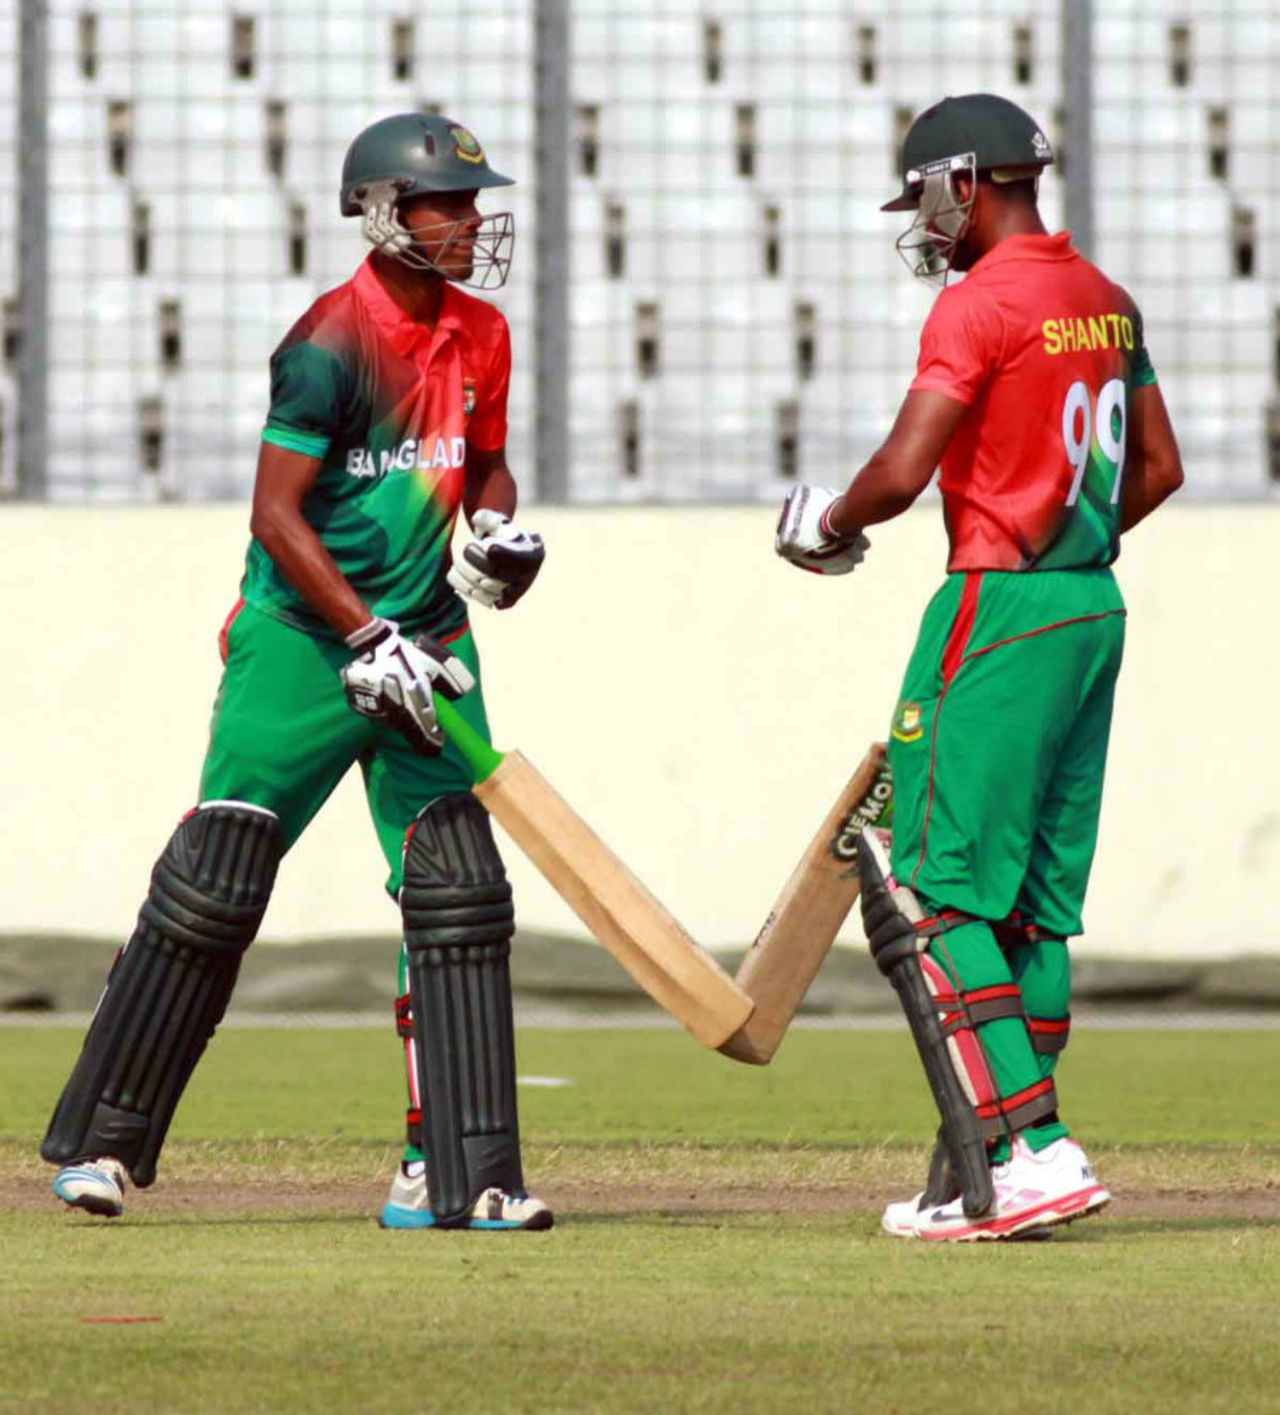 Bangladesh completed the chase with six overs to spare in Mirpur, Bangladesh U-19 v South Africa U-19, Mirpur, April 8, 2015 